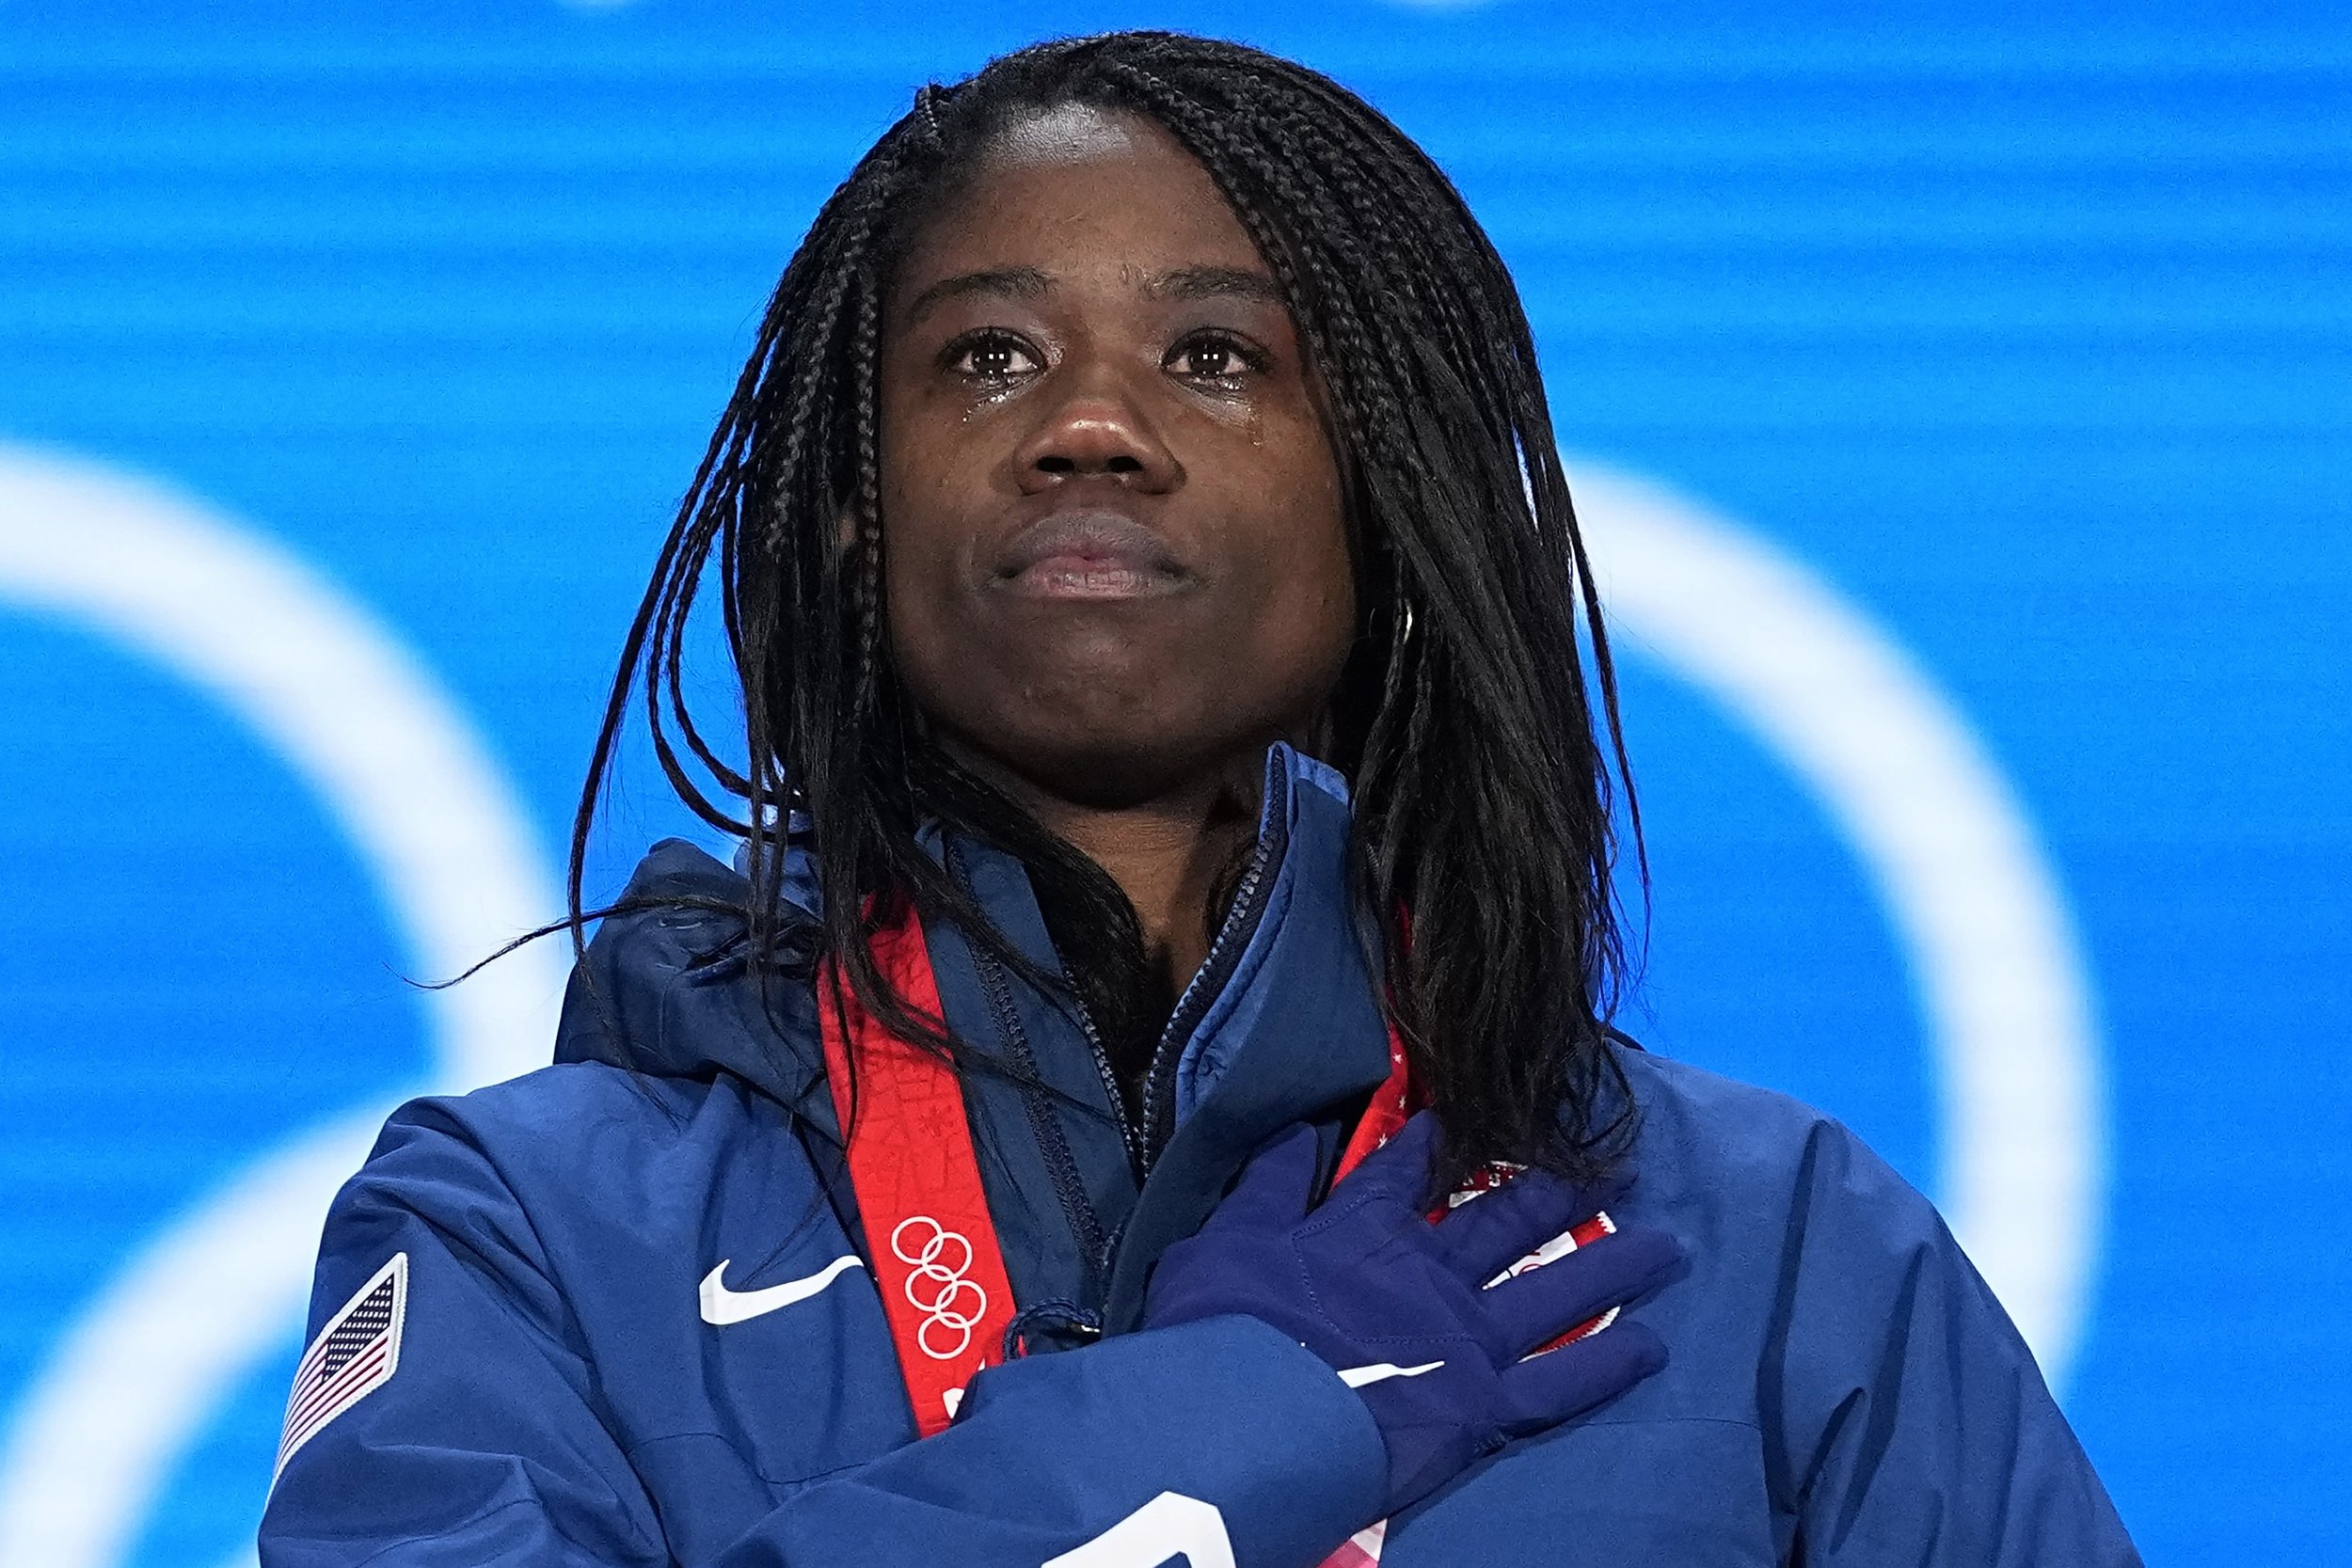  Gold medalist Erin Jackson of the United States stands for her national anthem during the medal ceremony for the speedskating women's 500-meter race at the 2022 Winter Olympics, Monday, Feb. 14, 2022, in Beijing. (AP Photo/Sue Ogrocki) 